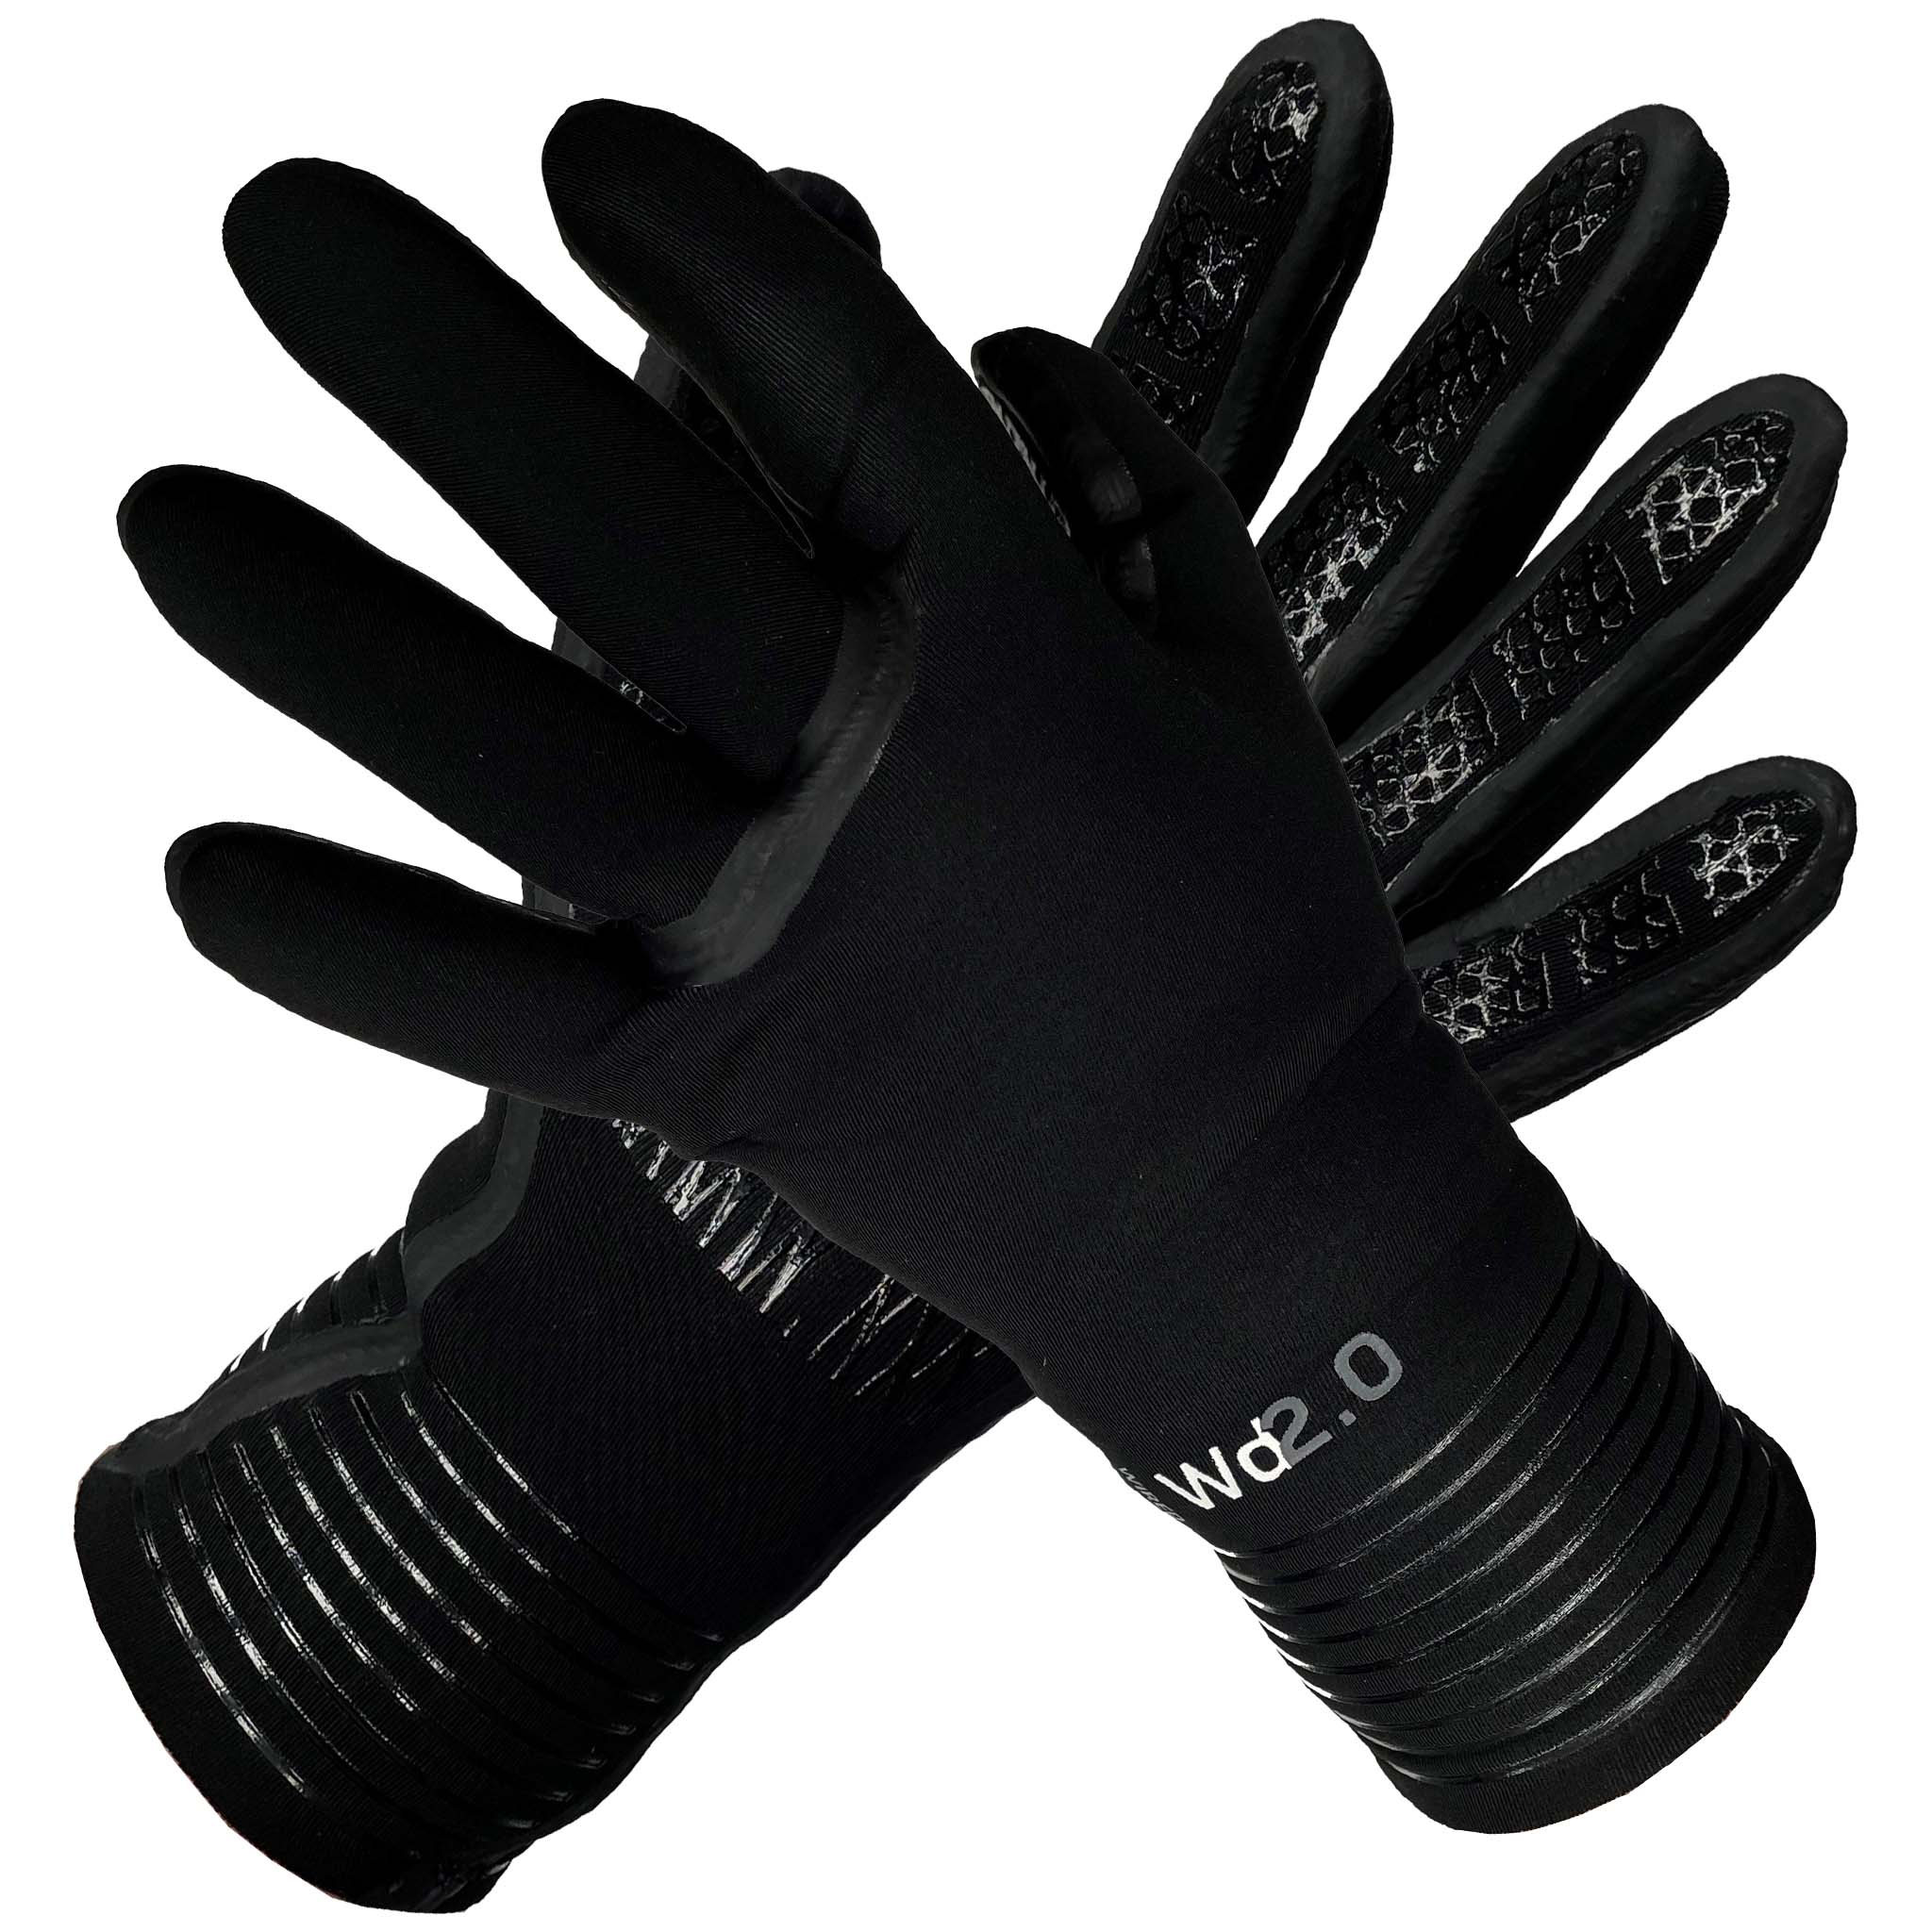 C-Skins Wired 2mm Glued and Blindstitched Neoprene Wetsuit Gloves